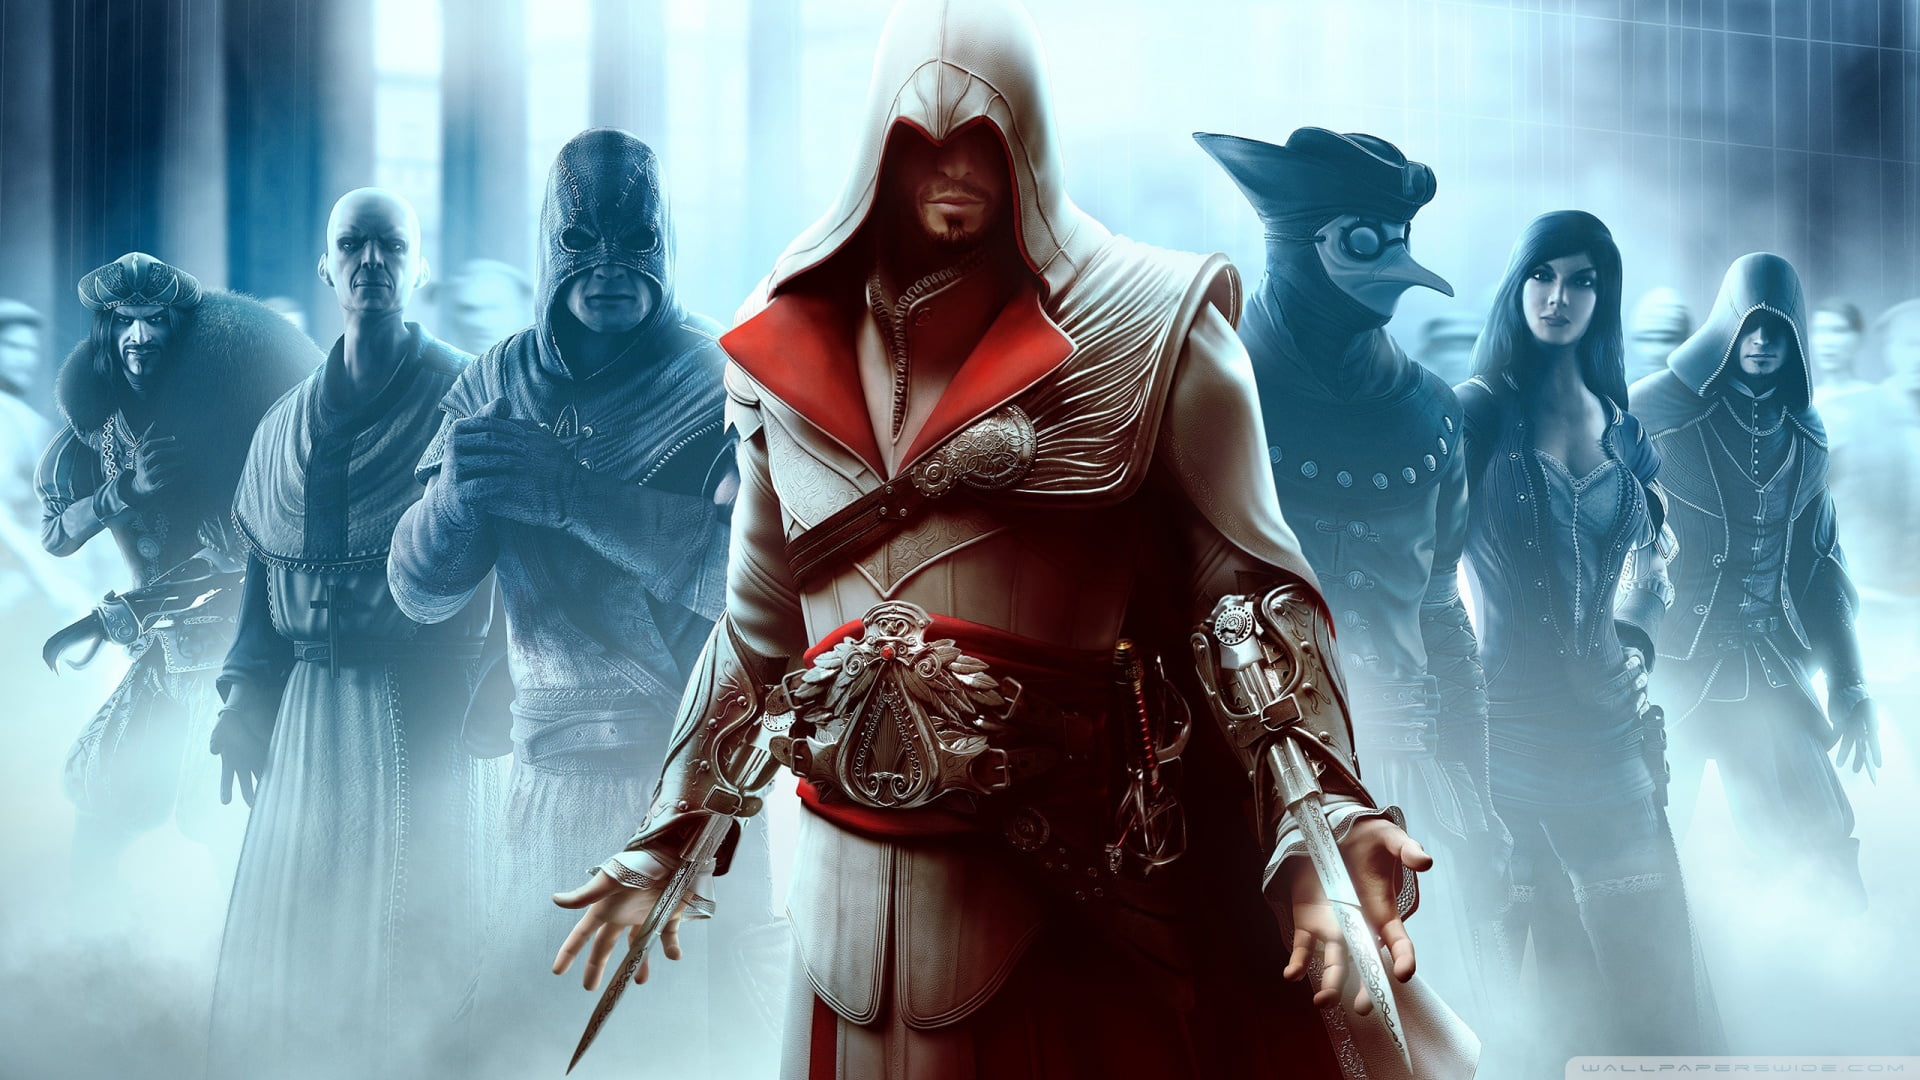 Assassin's Creed game poster, Assassin's Creed: Brotherhood, video games, Assassin's Creed